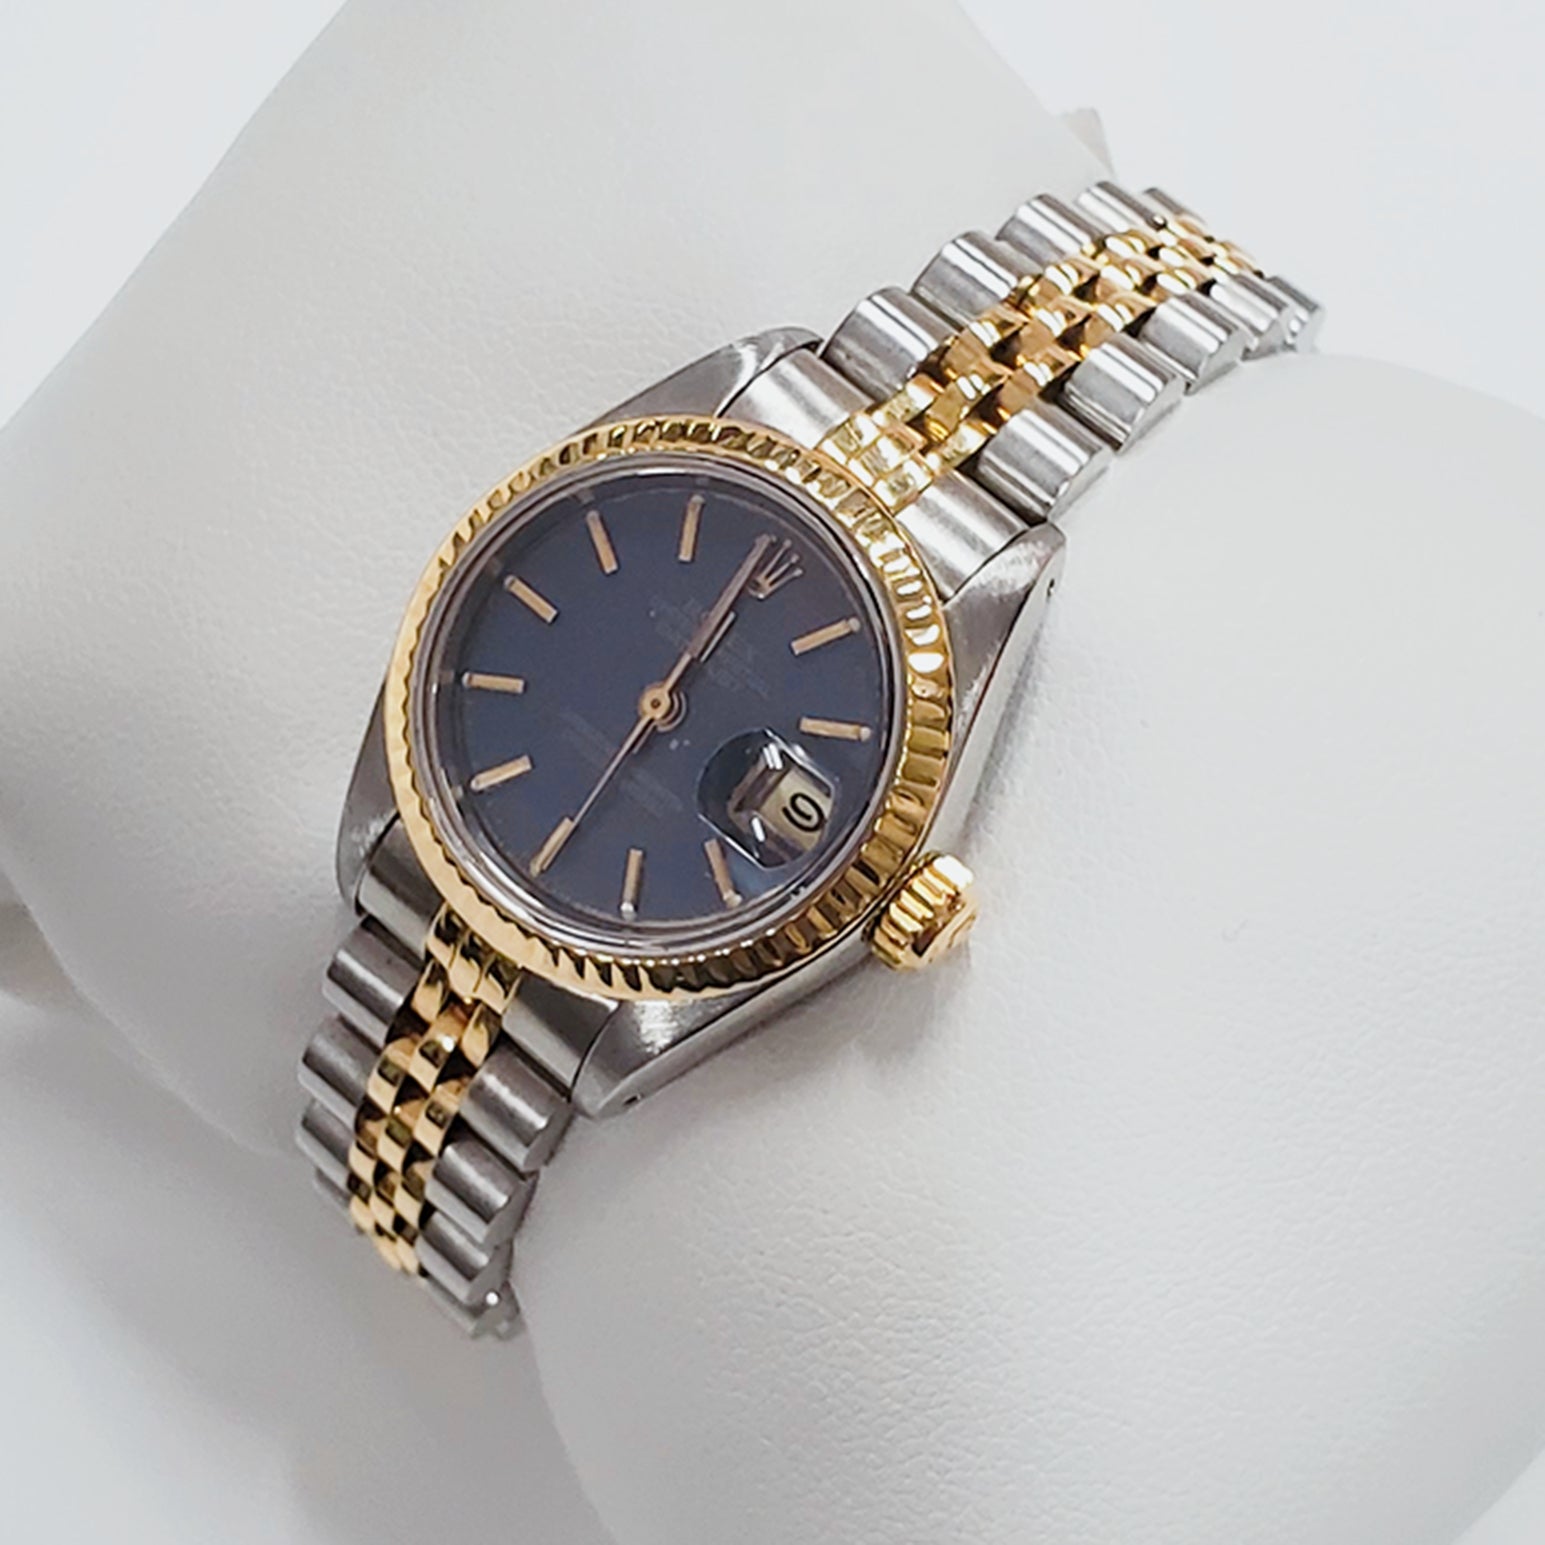 Ladies Rolex 26mm Two Tone DateJust 18K Gold Watch with Blue Dial and 18k Fluted Bezel. (Pre-Owned)